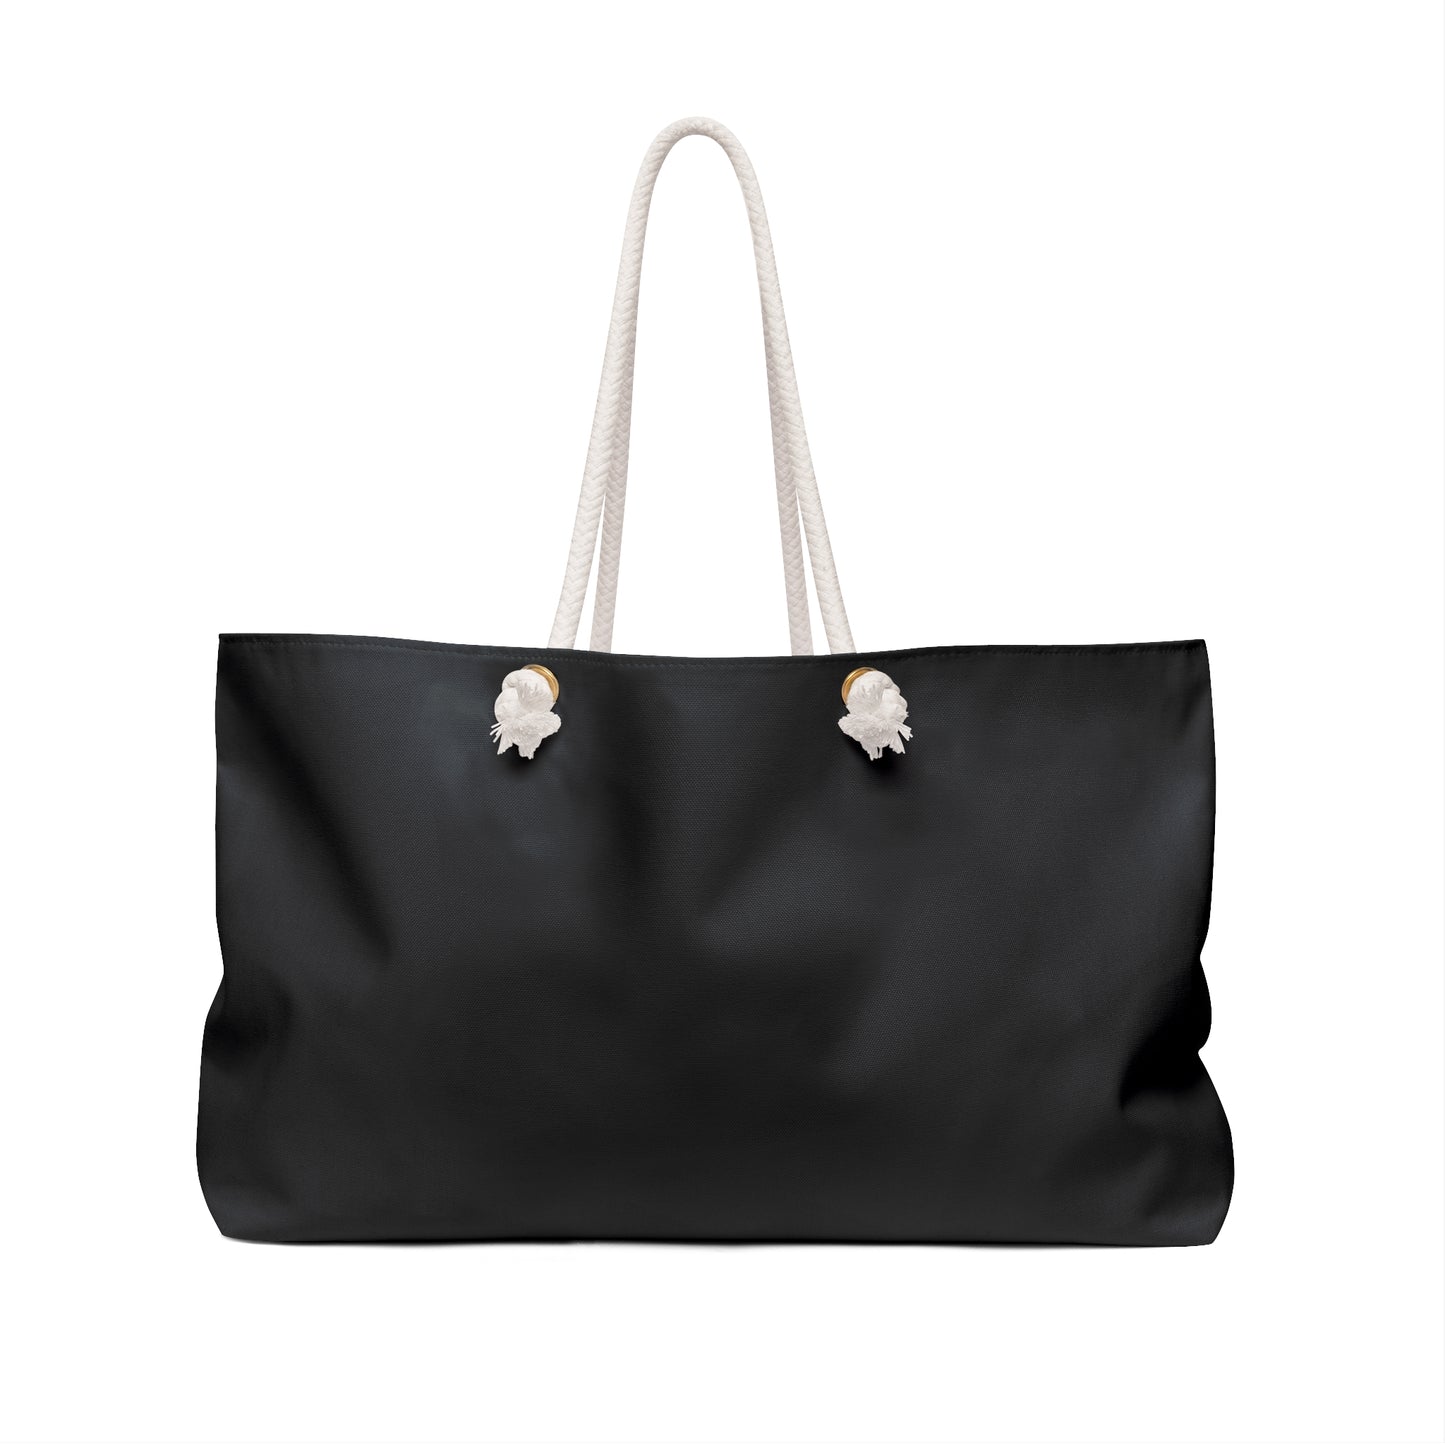 Weekender Bag | Black Tote | Be Still and Know